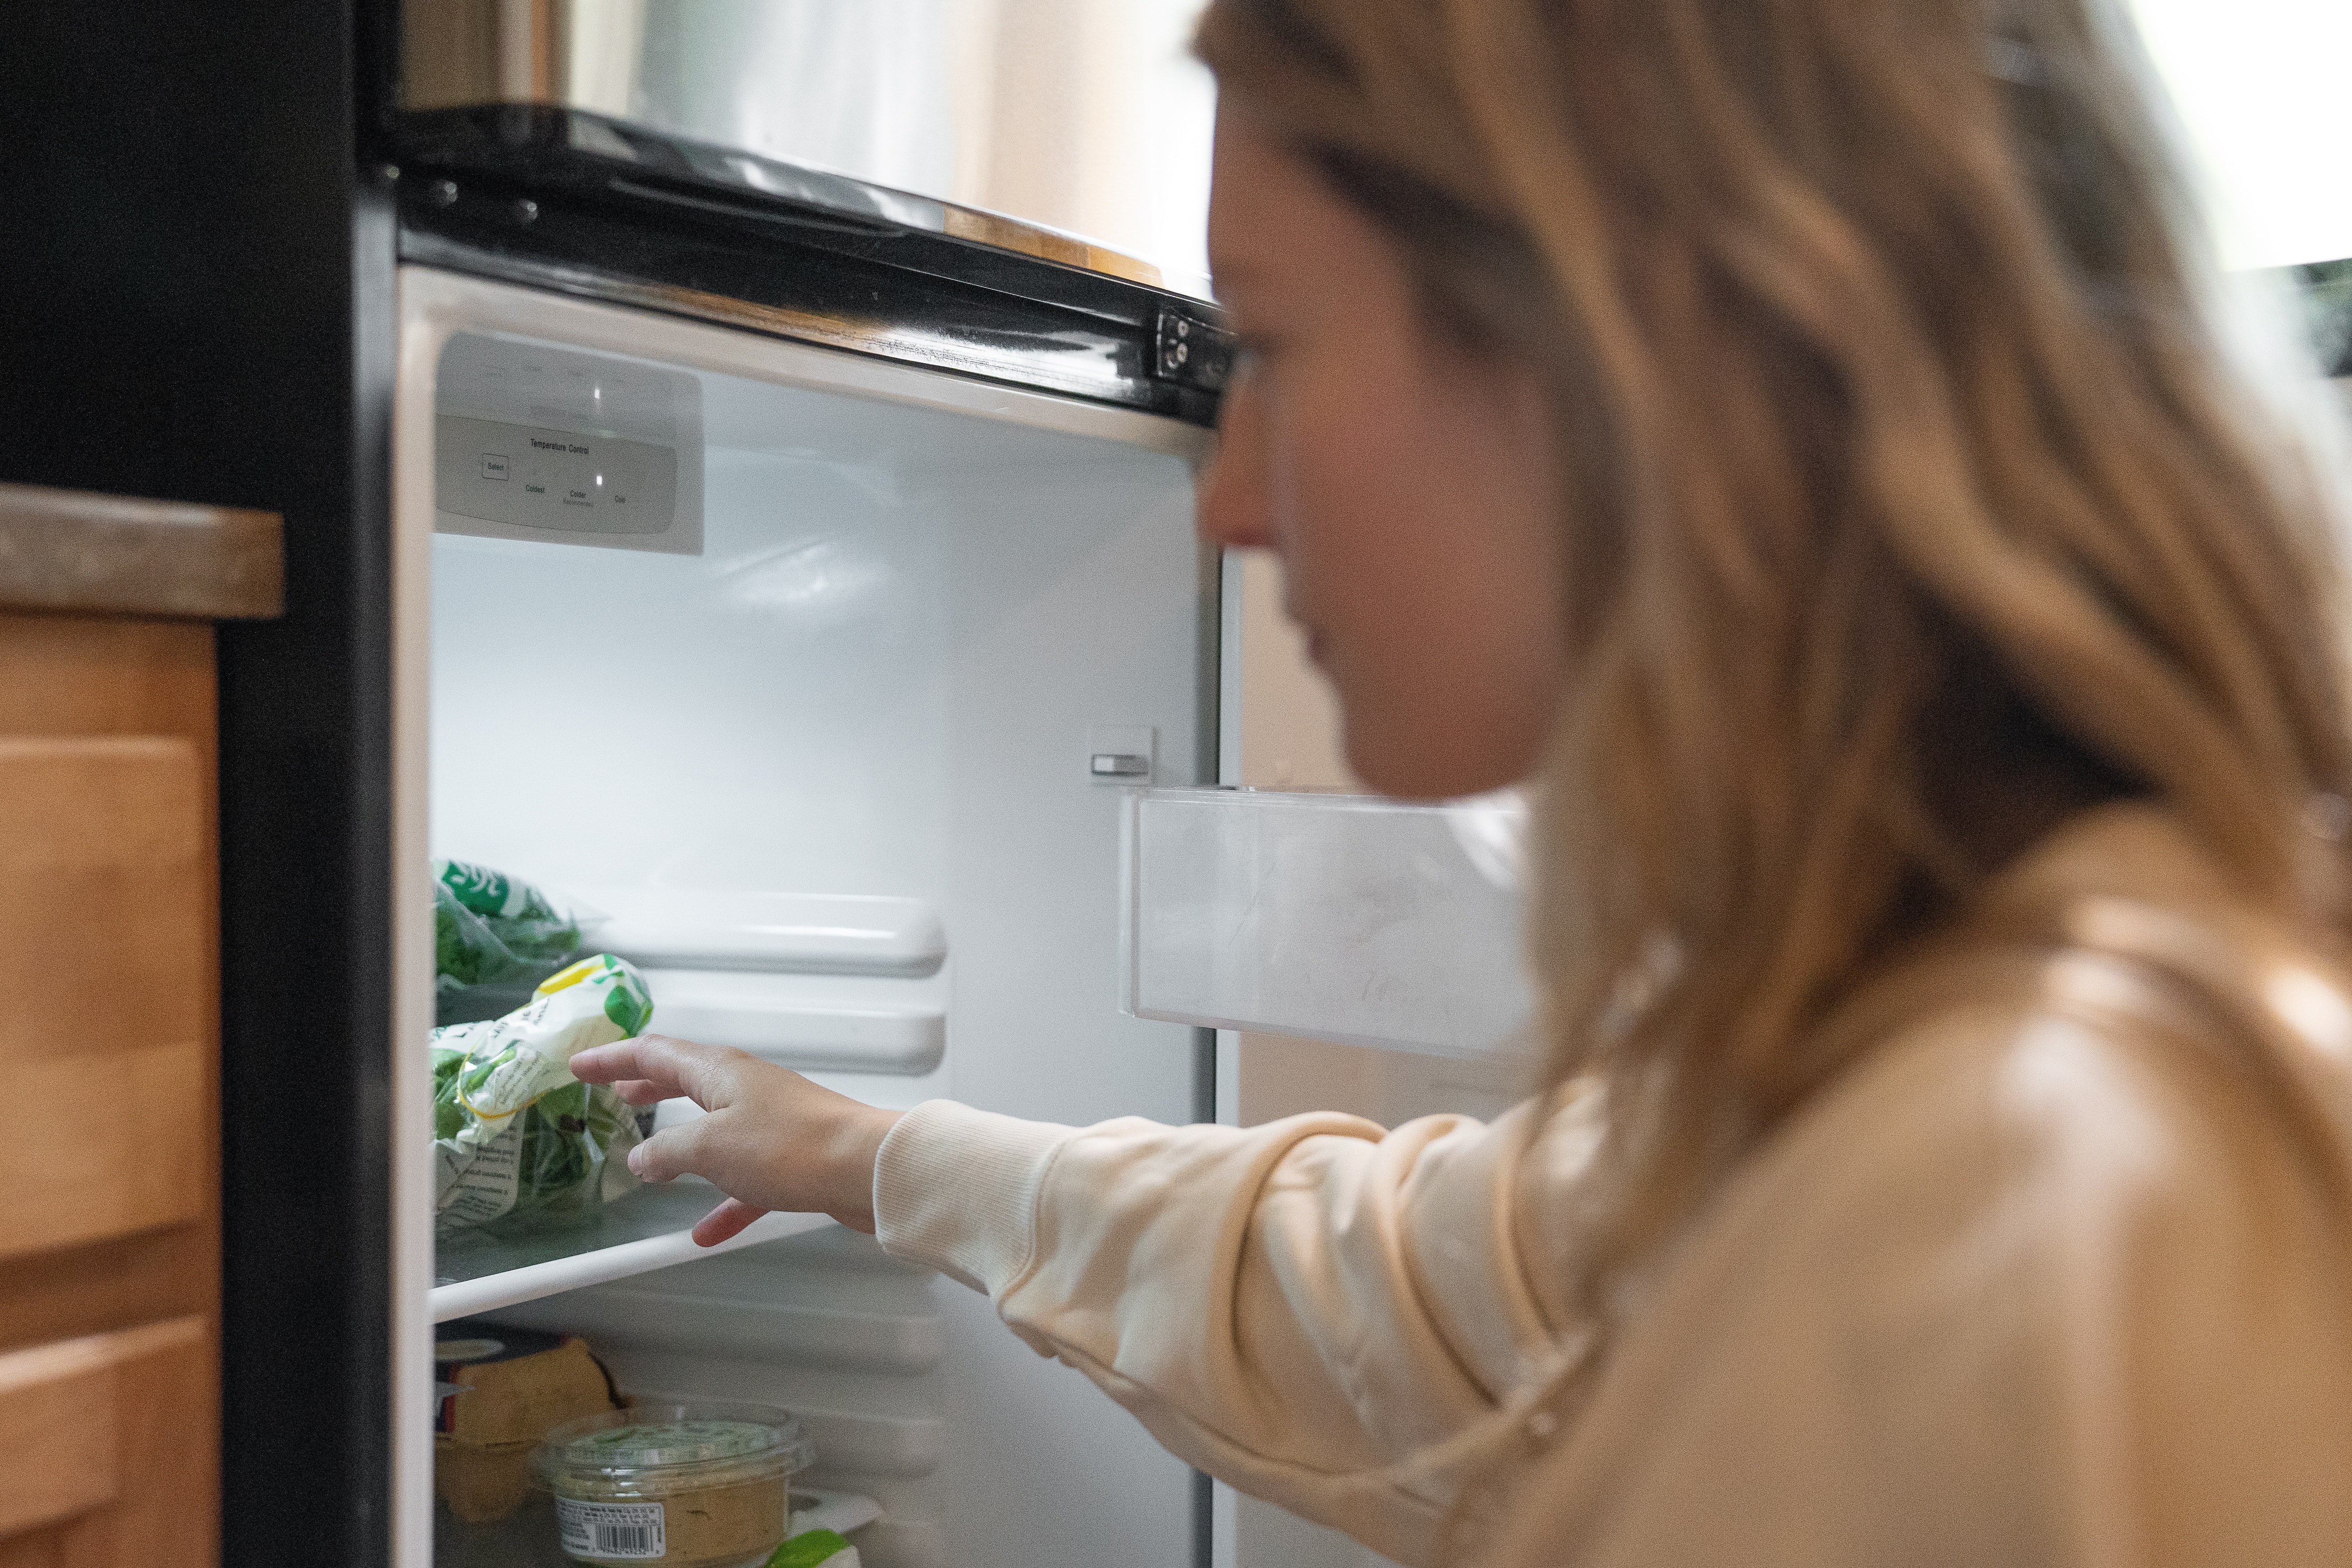 OP senses a strange presence behind her while cleaning the fridge | Photo: Pexels